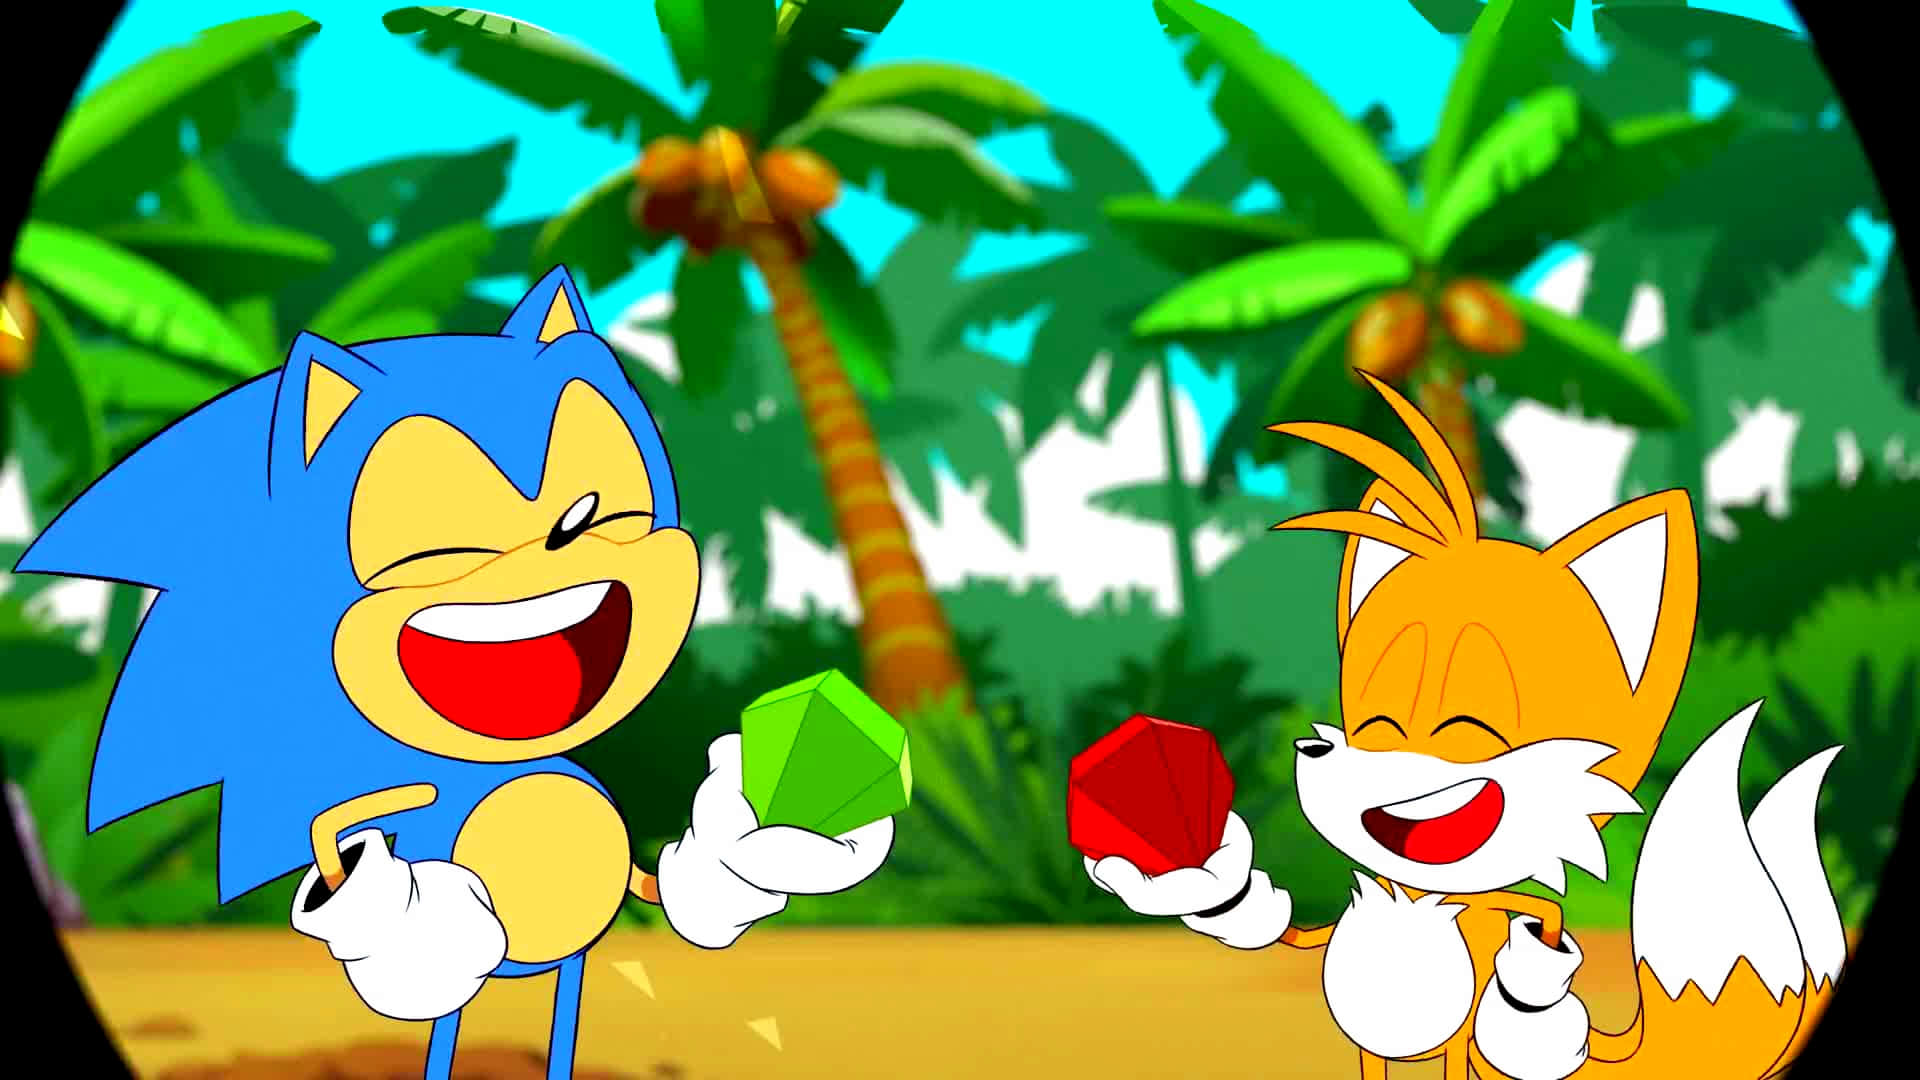 Sonic and Tails - The Ultimate Team Wallpaper